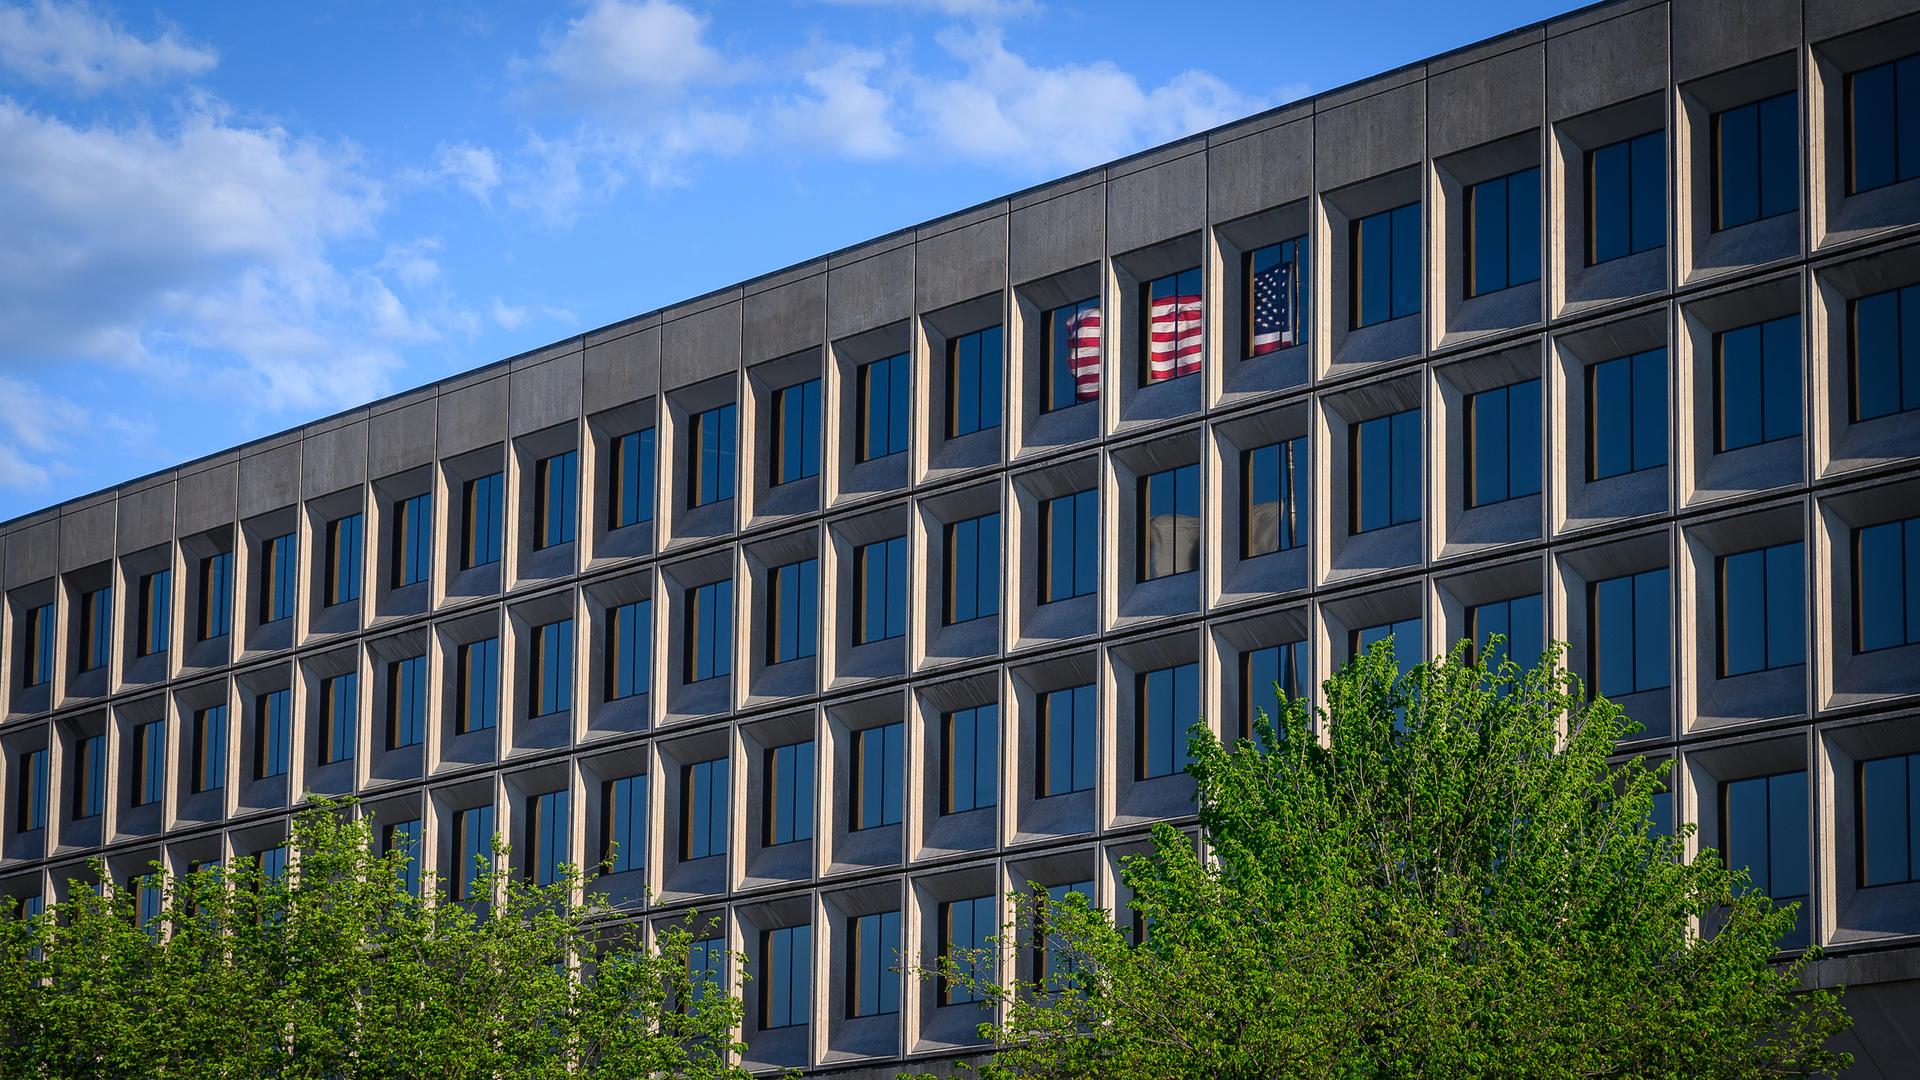 U.S. Department of Energy with the American flag reflected in the windows.